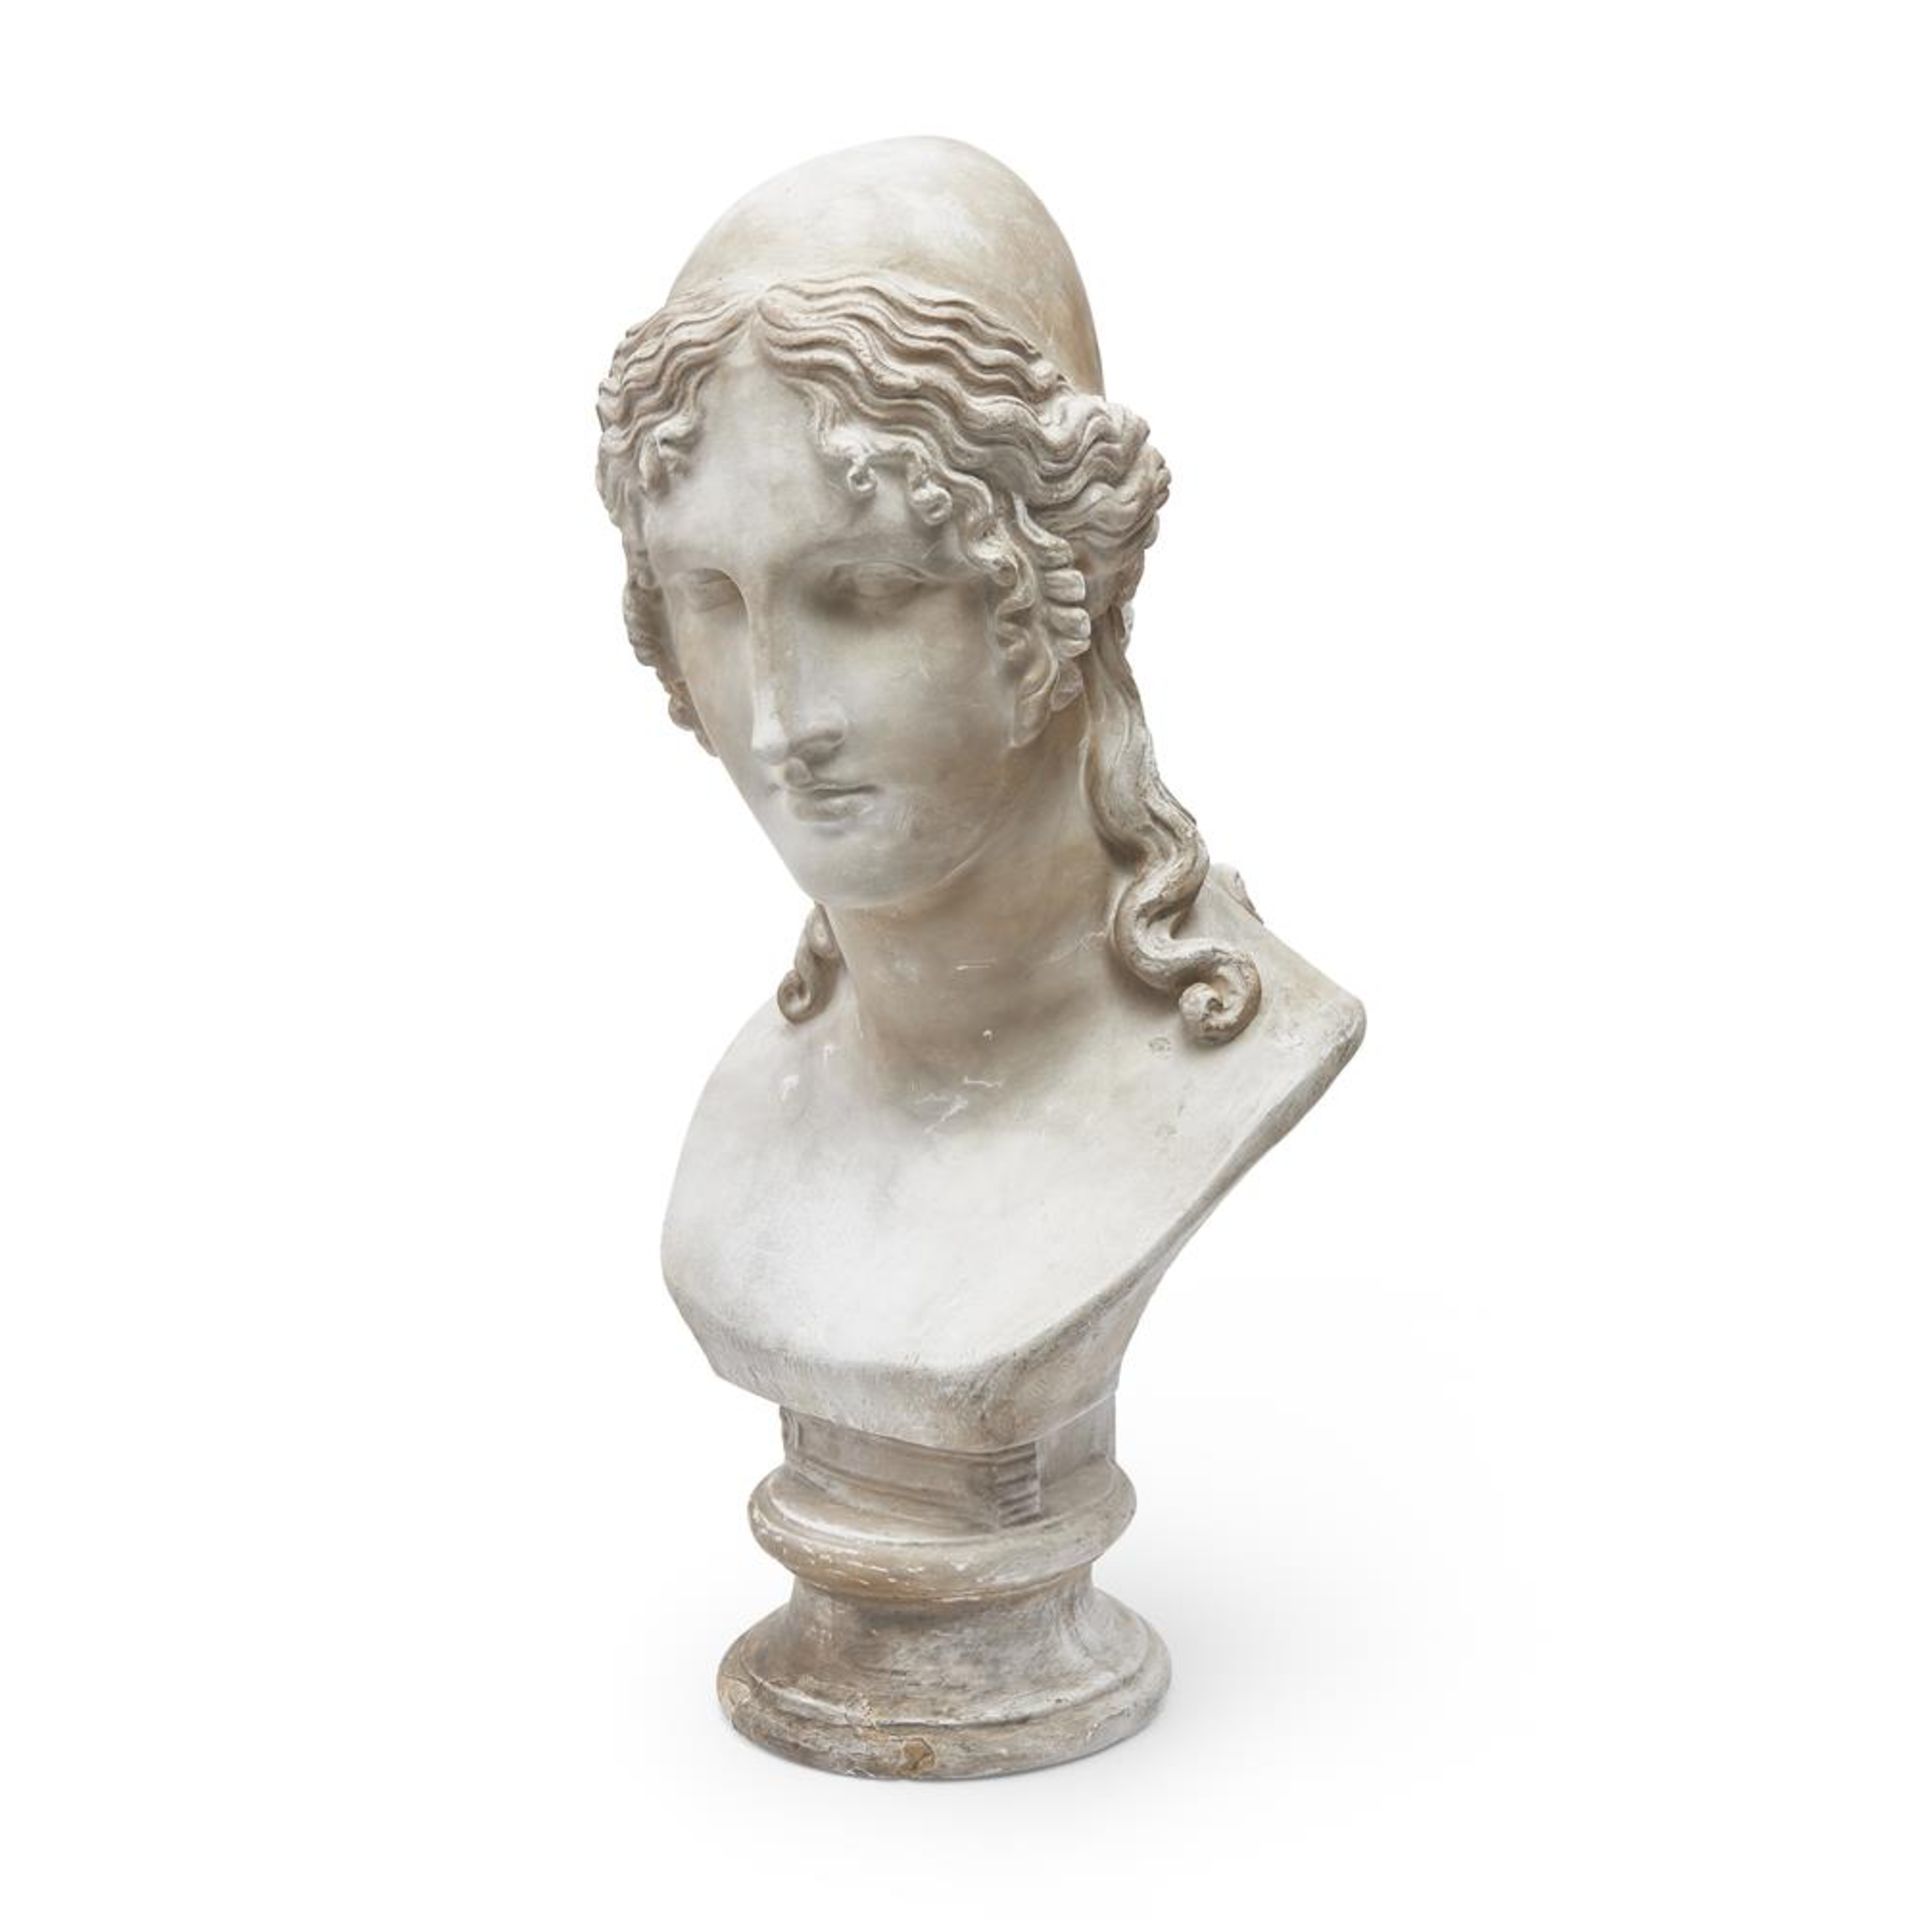 A WHITE PAINTED PLASTER BUST OF HELEN OF TROY, MID 20TH CENTURY